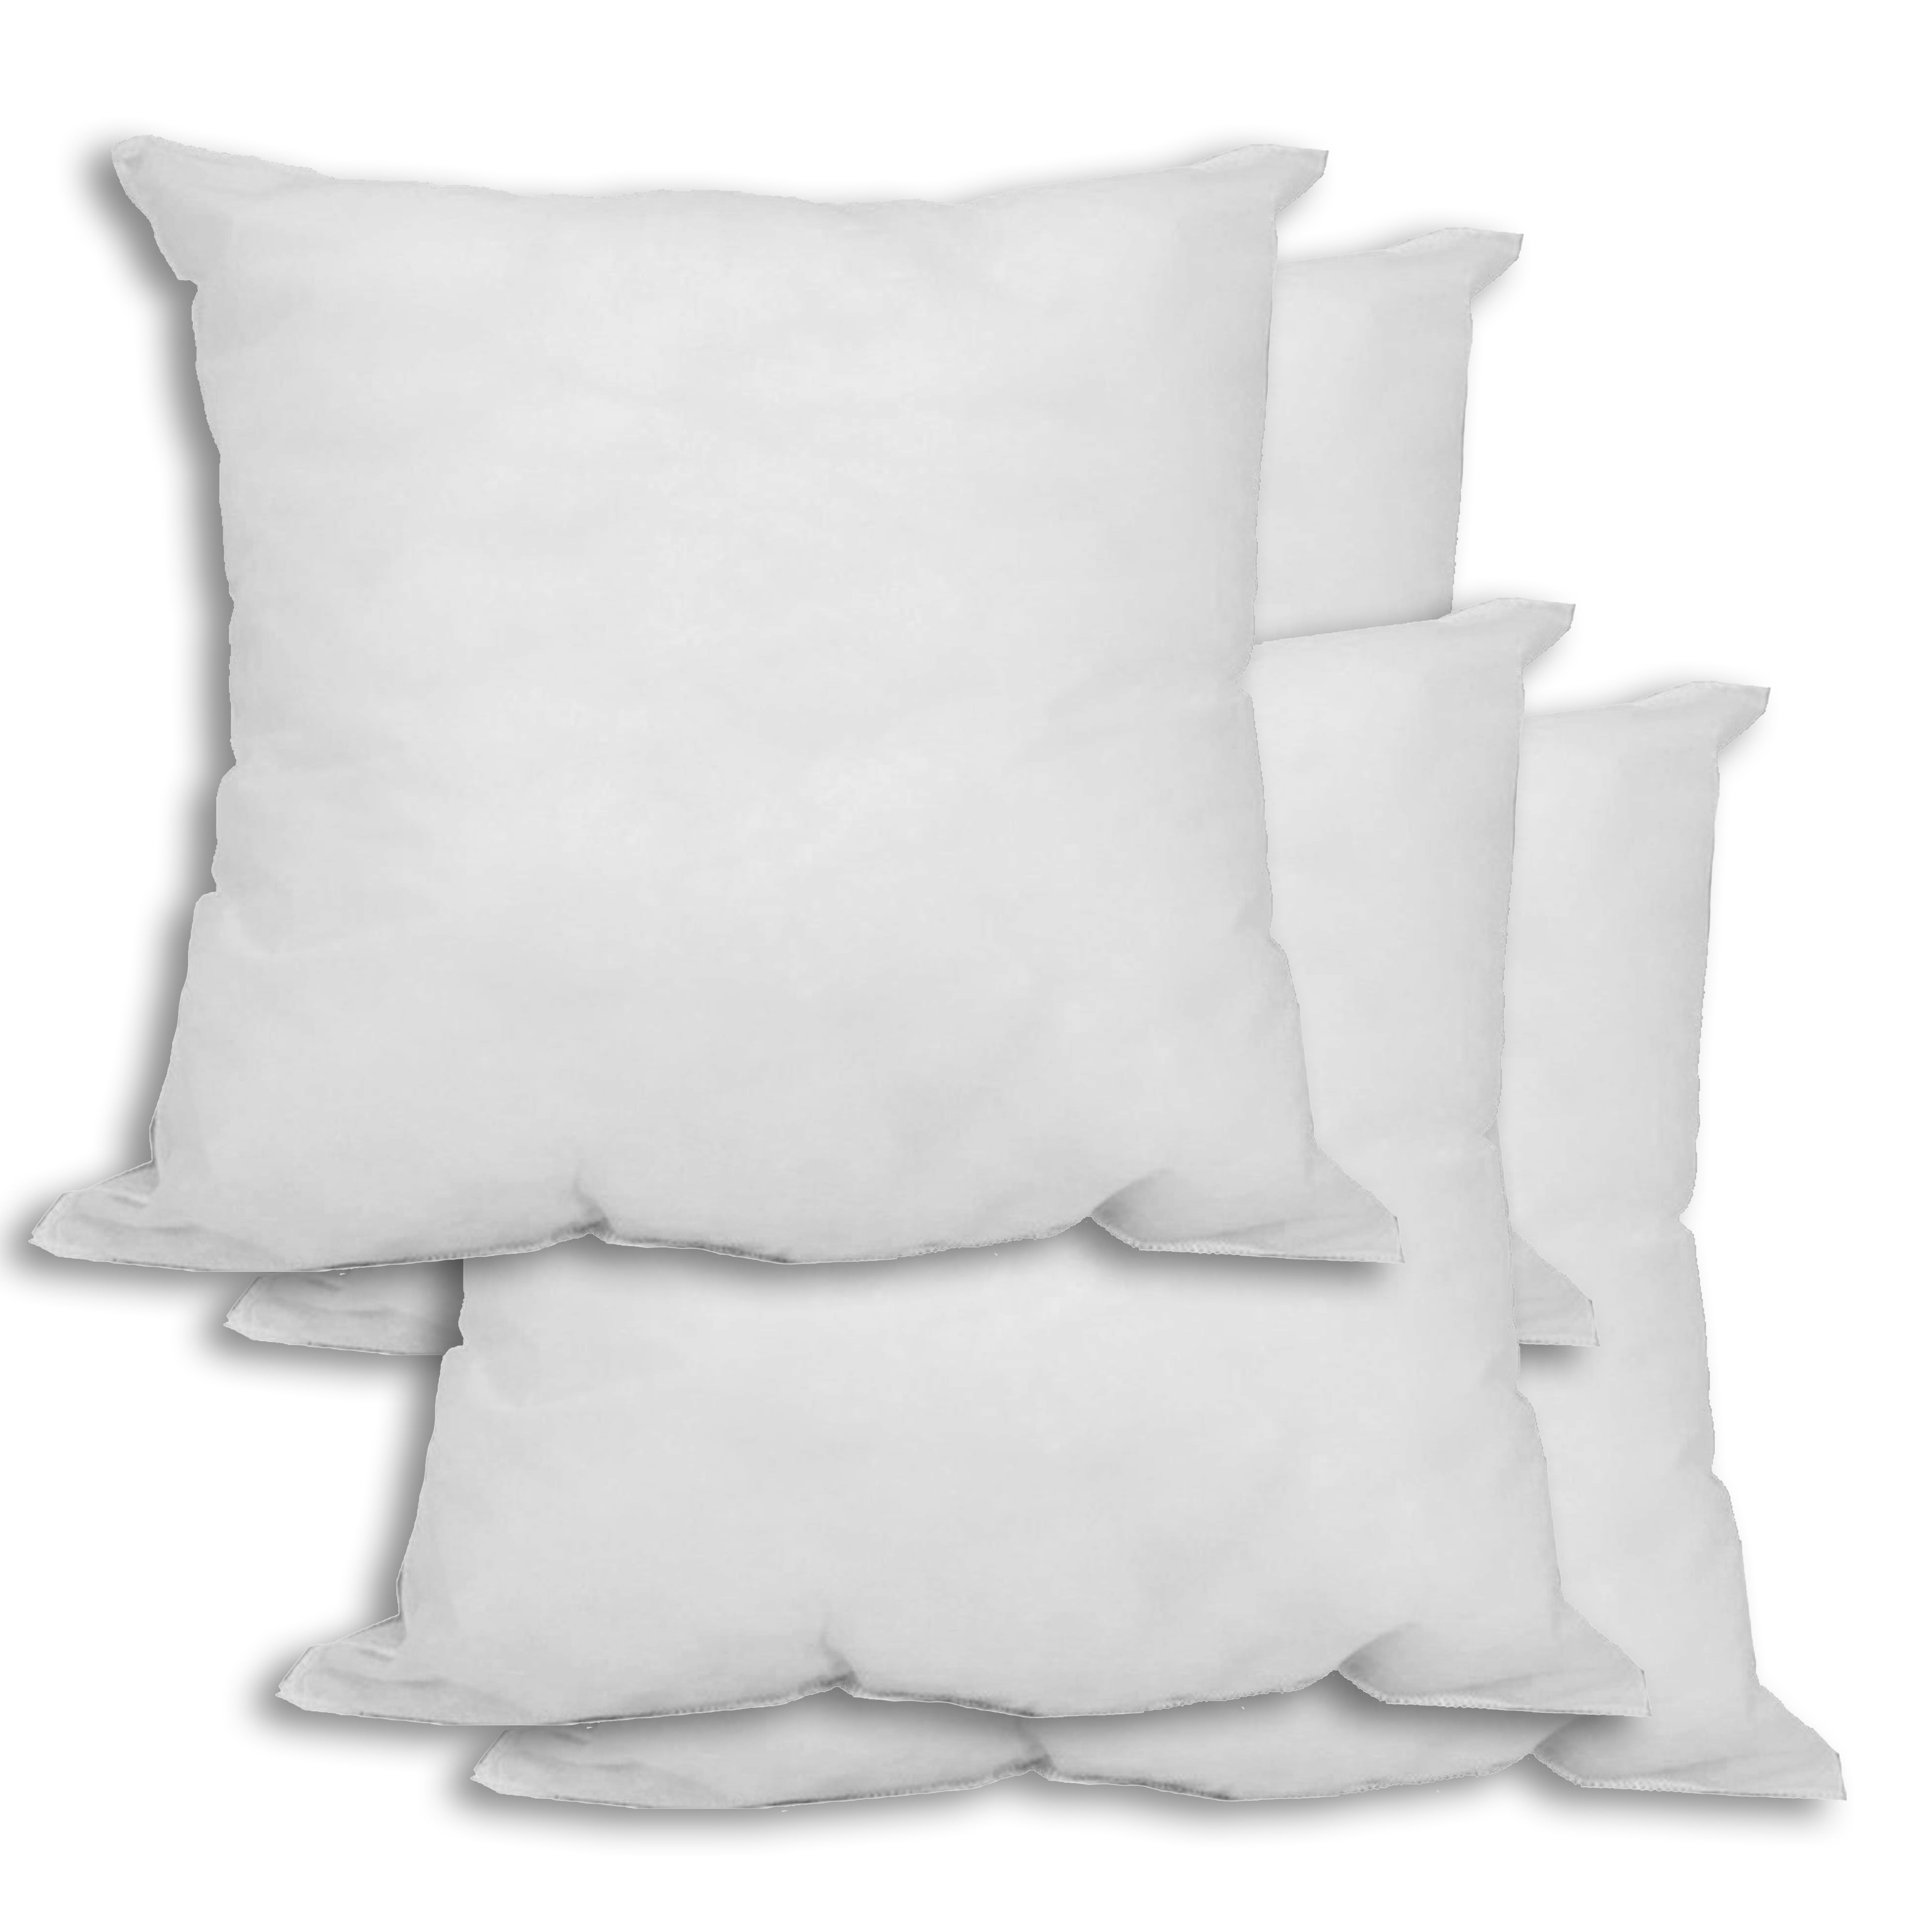 Acanva Throw Pillow Inserts 16 x 16 Decorative Stuffer Soft  Hypoallergenic Polyester Couch Square Form Euro Sham Cushion Filler,  16-4P, White 4 Pack 